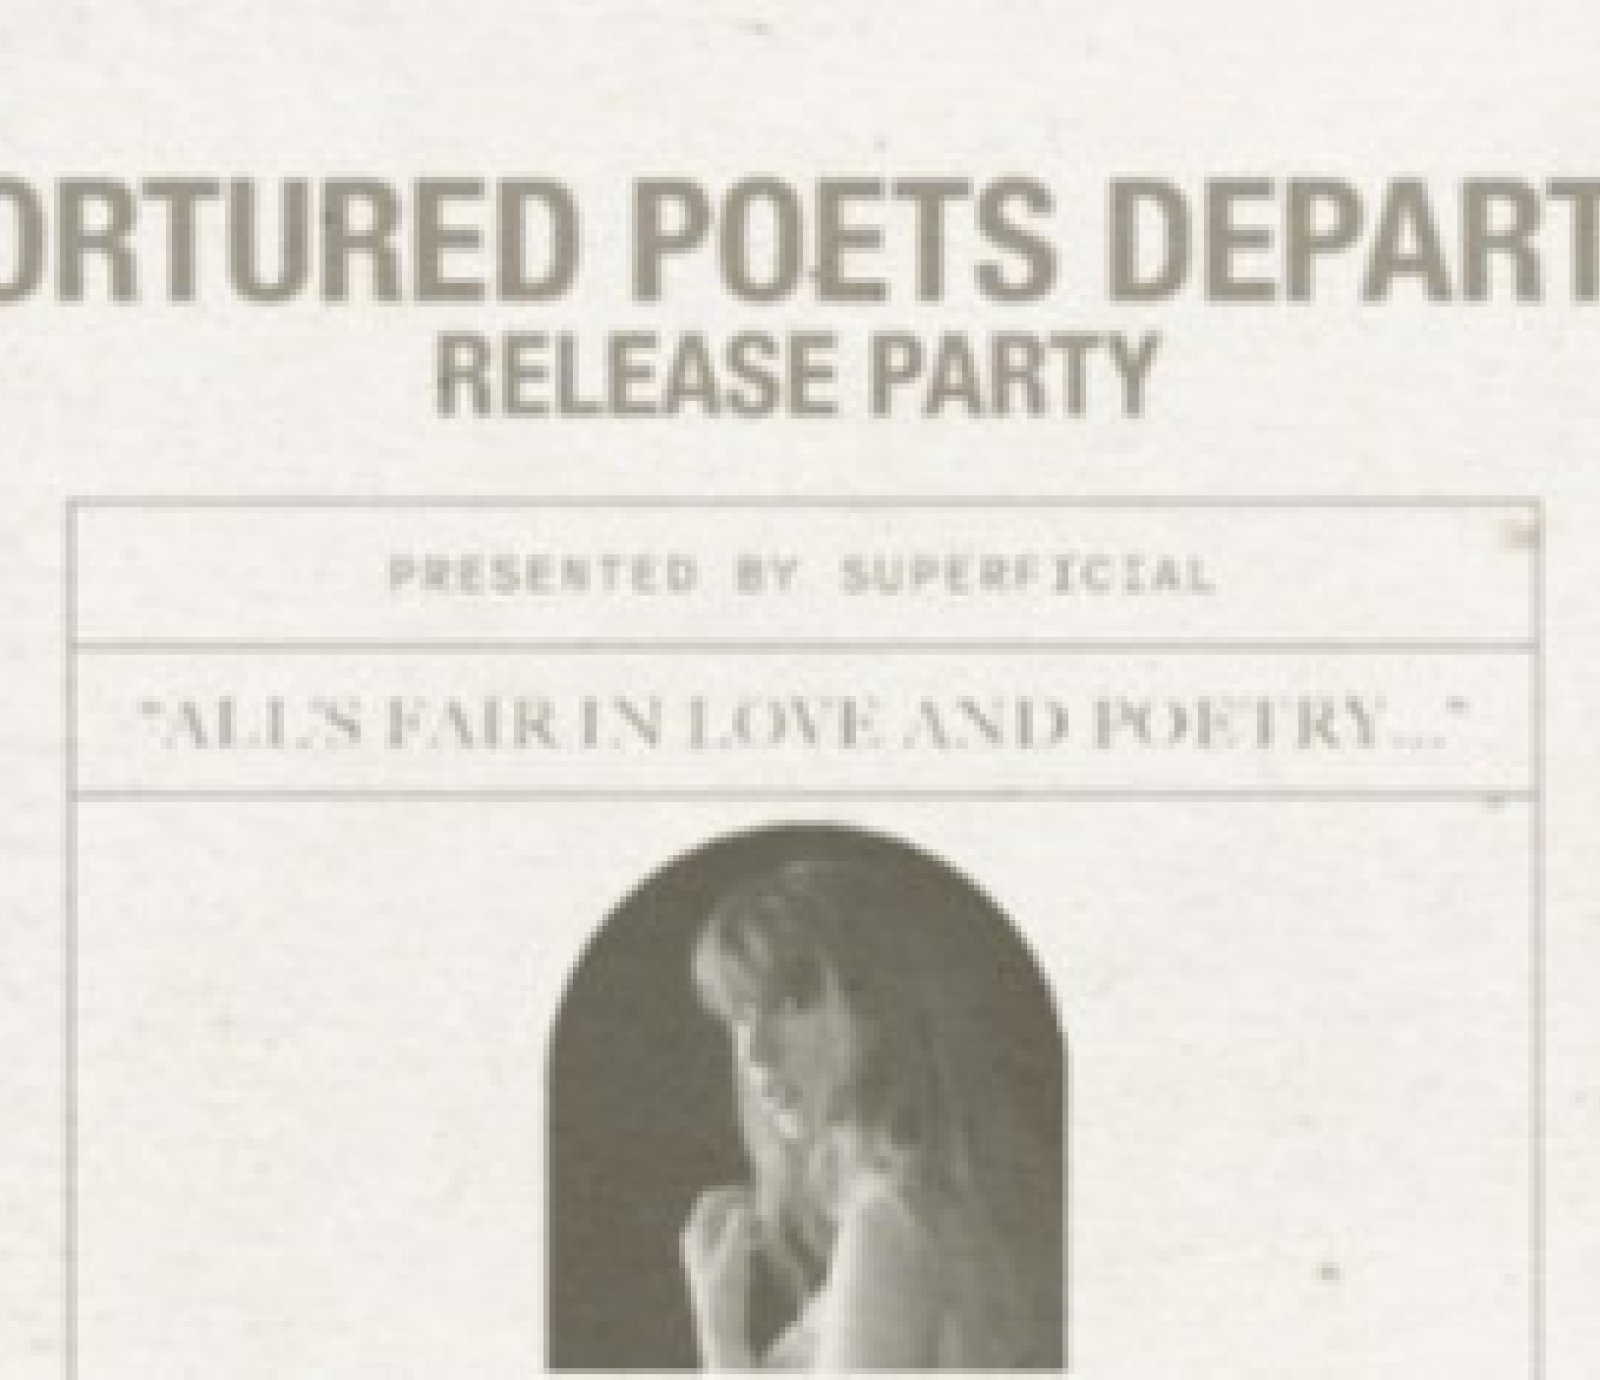 The Tortured Poets Department Release Party